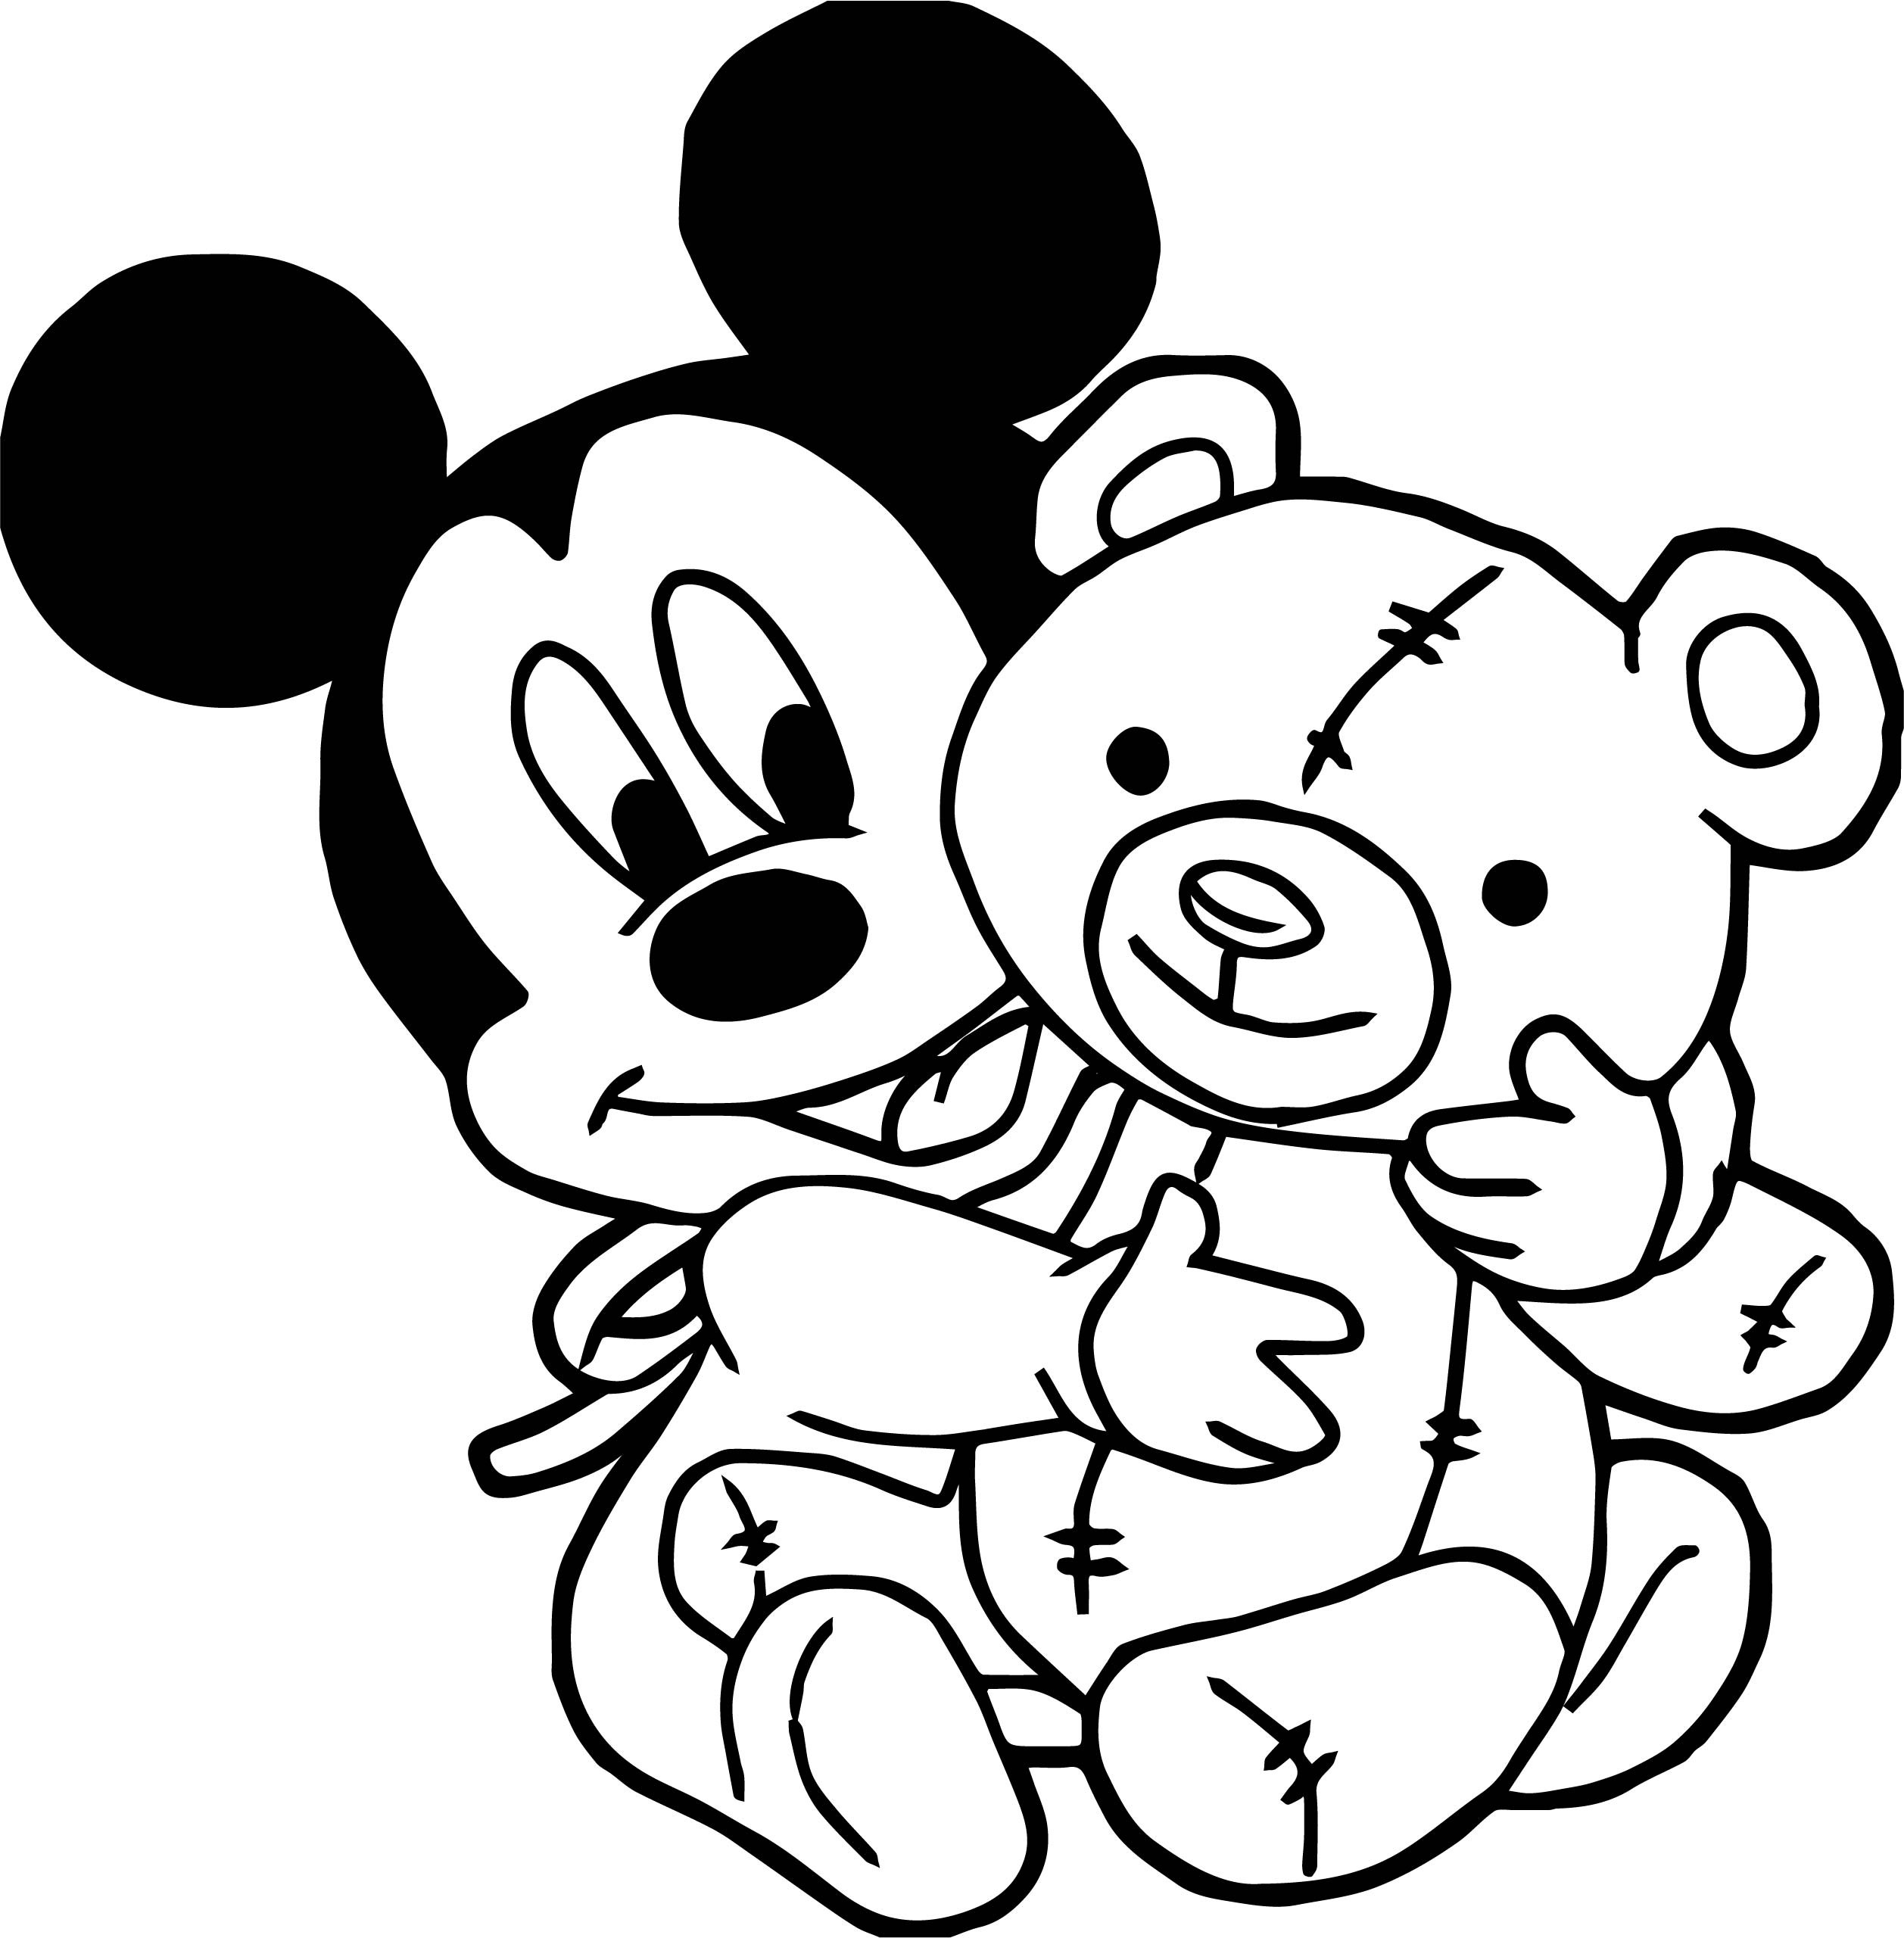 Baby Mickey Mouse Coloring Page
 Baby Mickey Toy Coloring Page